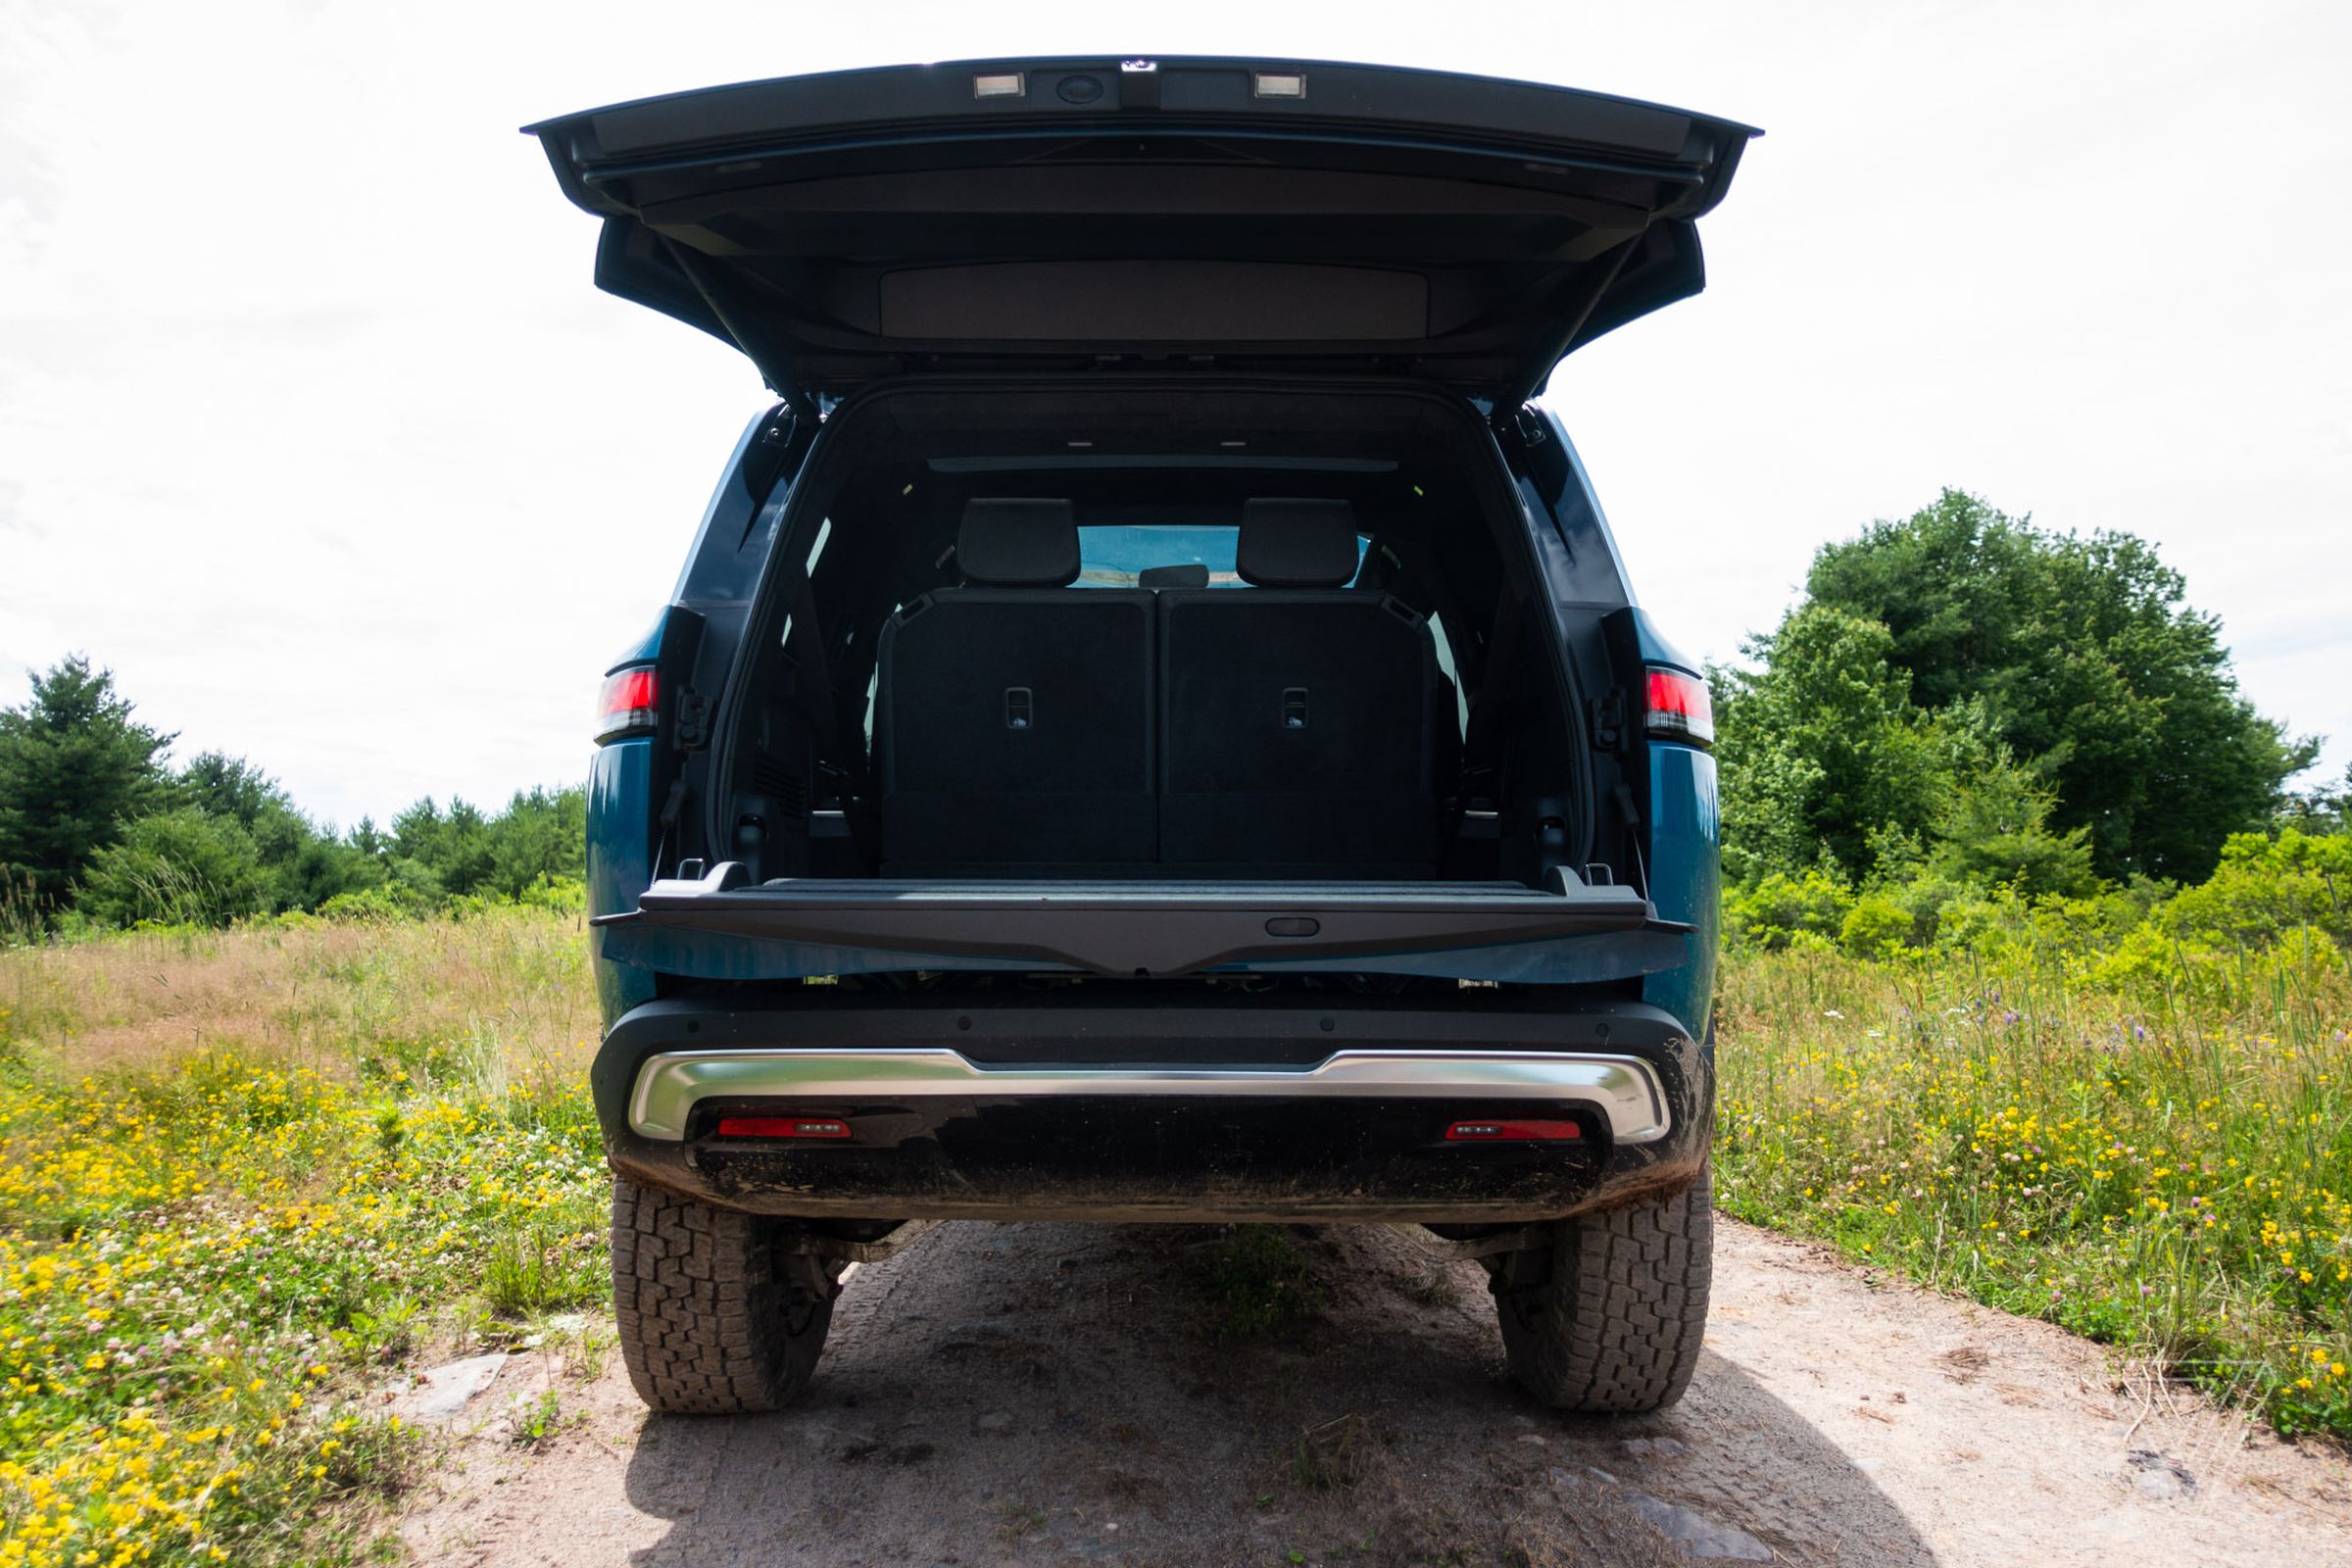 A Rivian R1S from the rear with the liftgate open